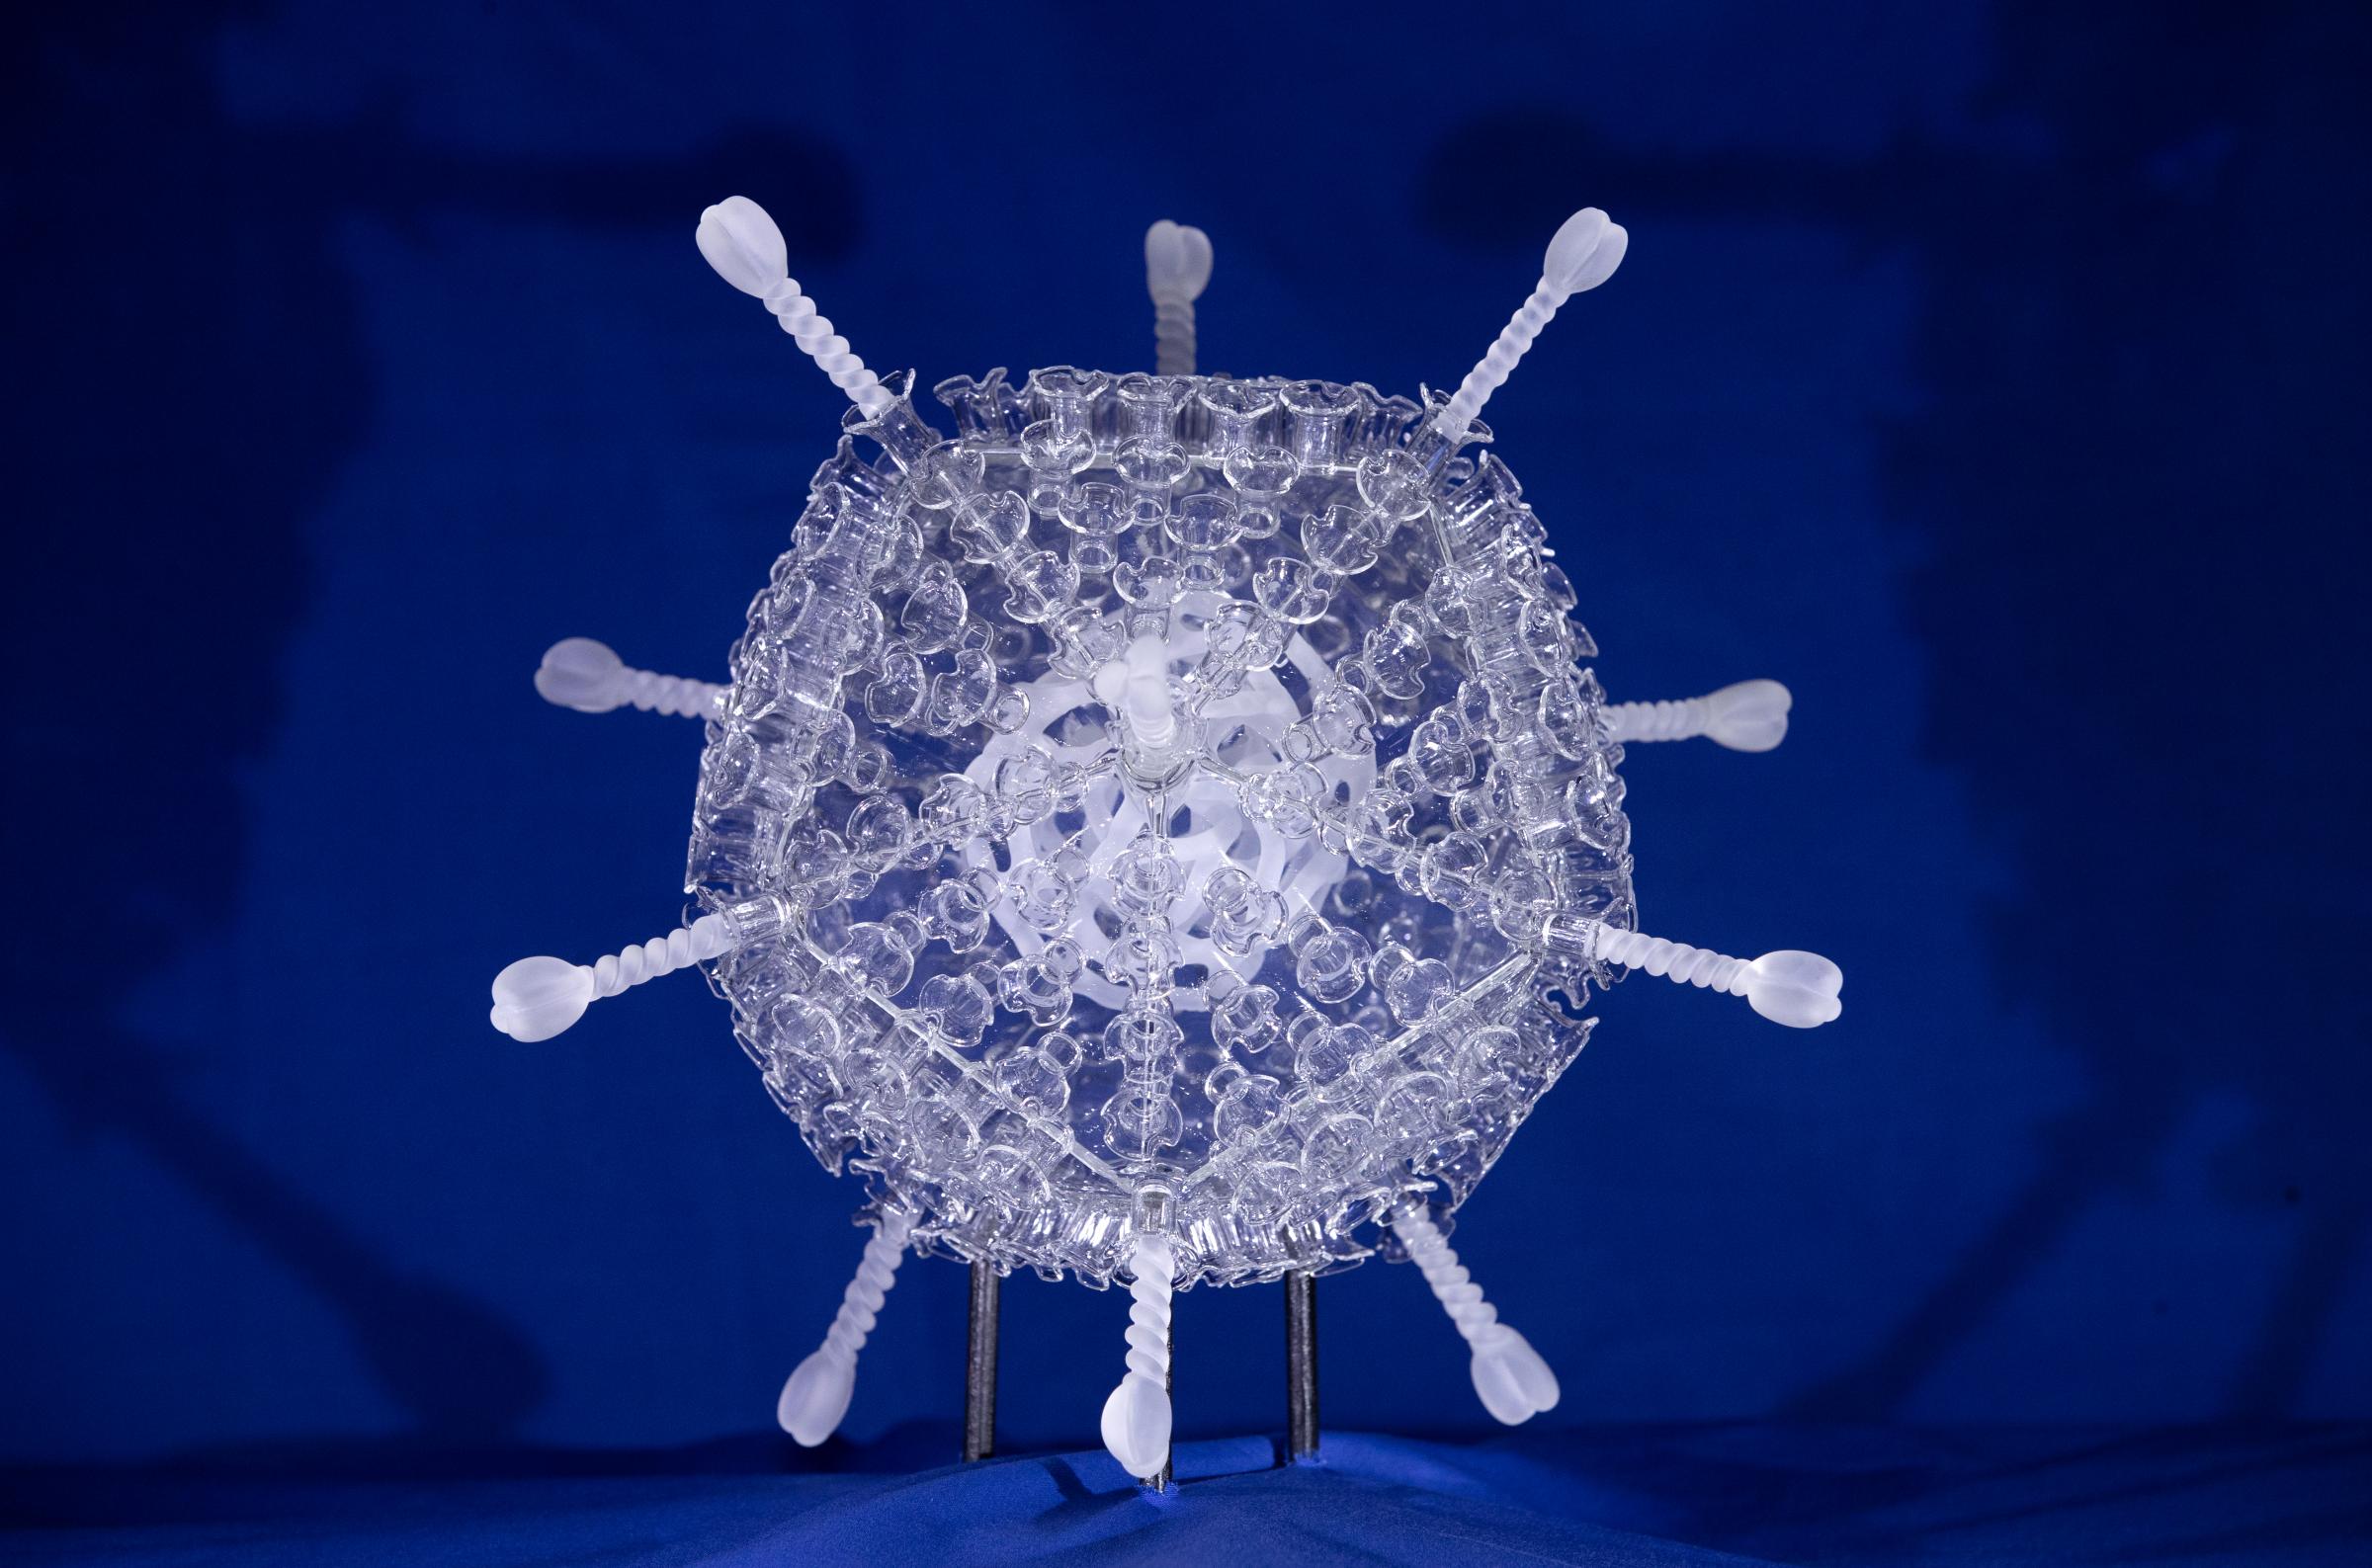 A glass sculpture of the Oxford/AstraZeneca vaccine by artist Luke Jerram to mark the ten millionth vaccination in the UK